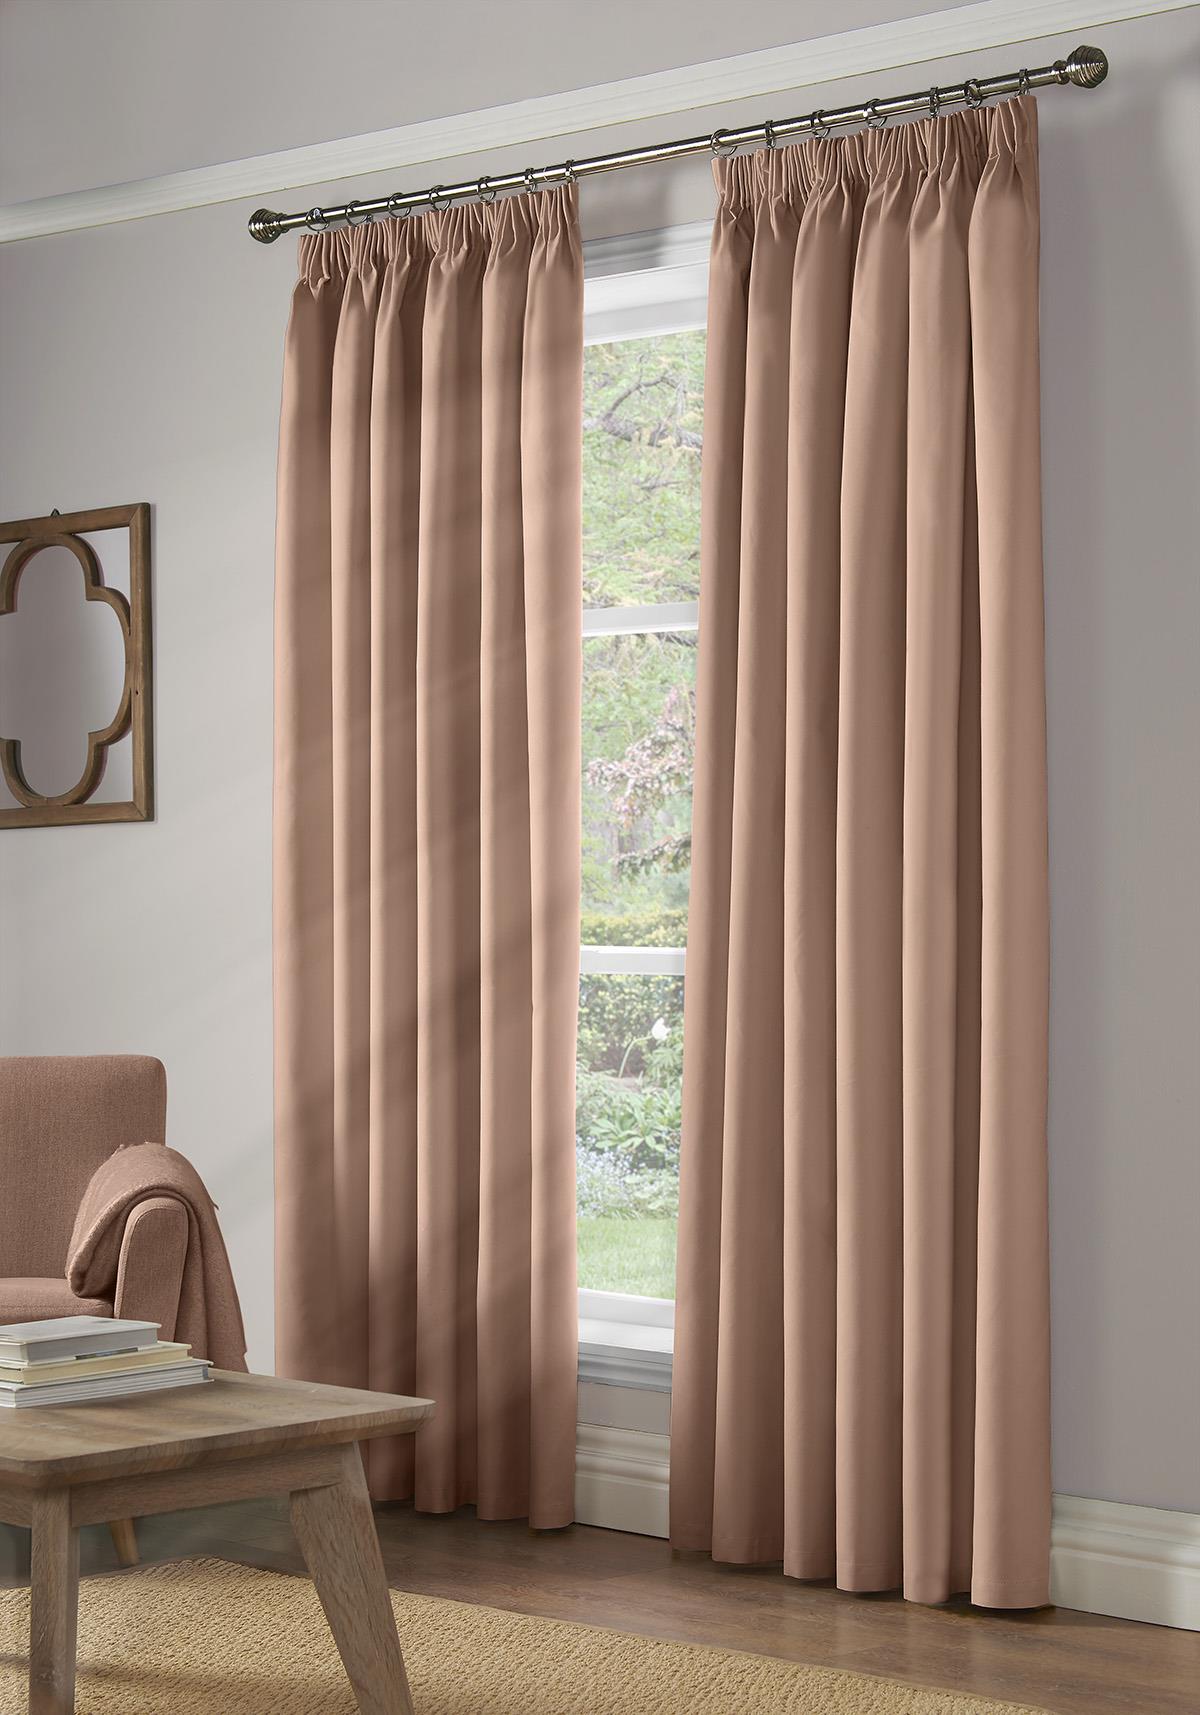 Pink 100% Blackout Thermal Taped Curtains - Pair